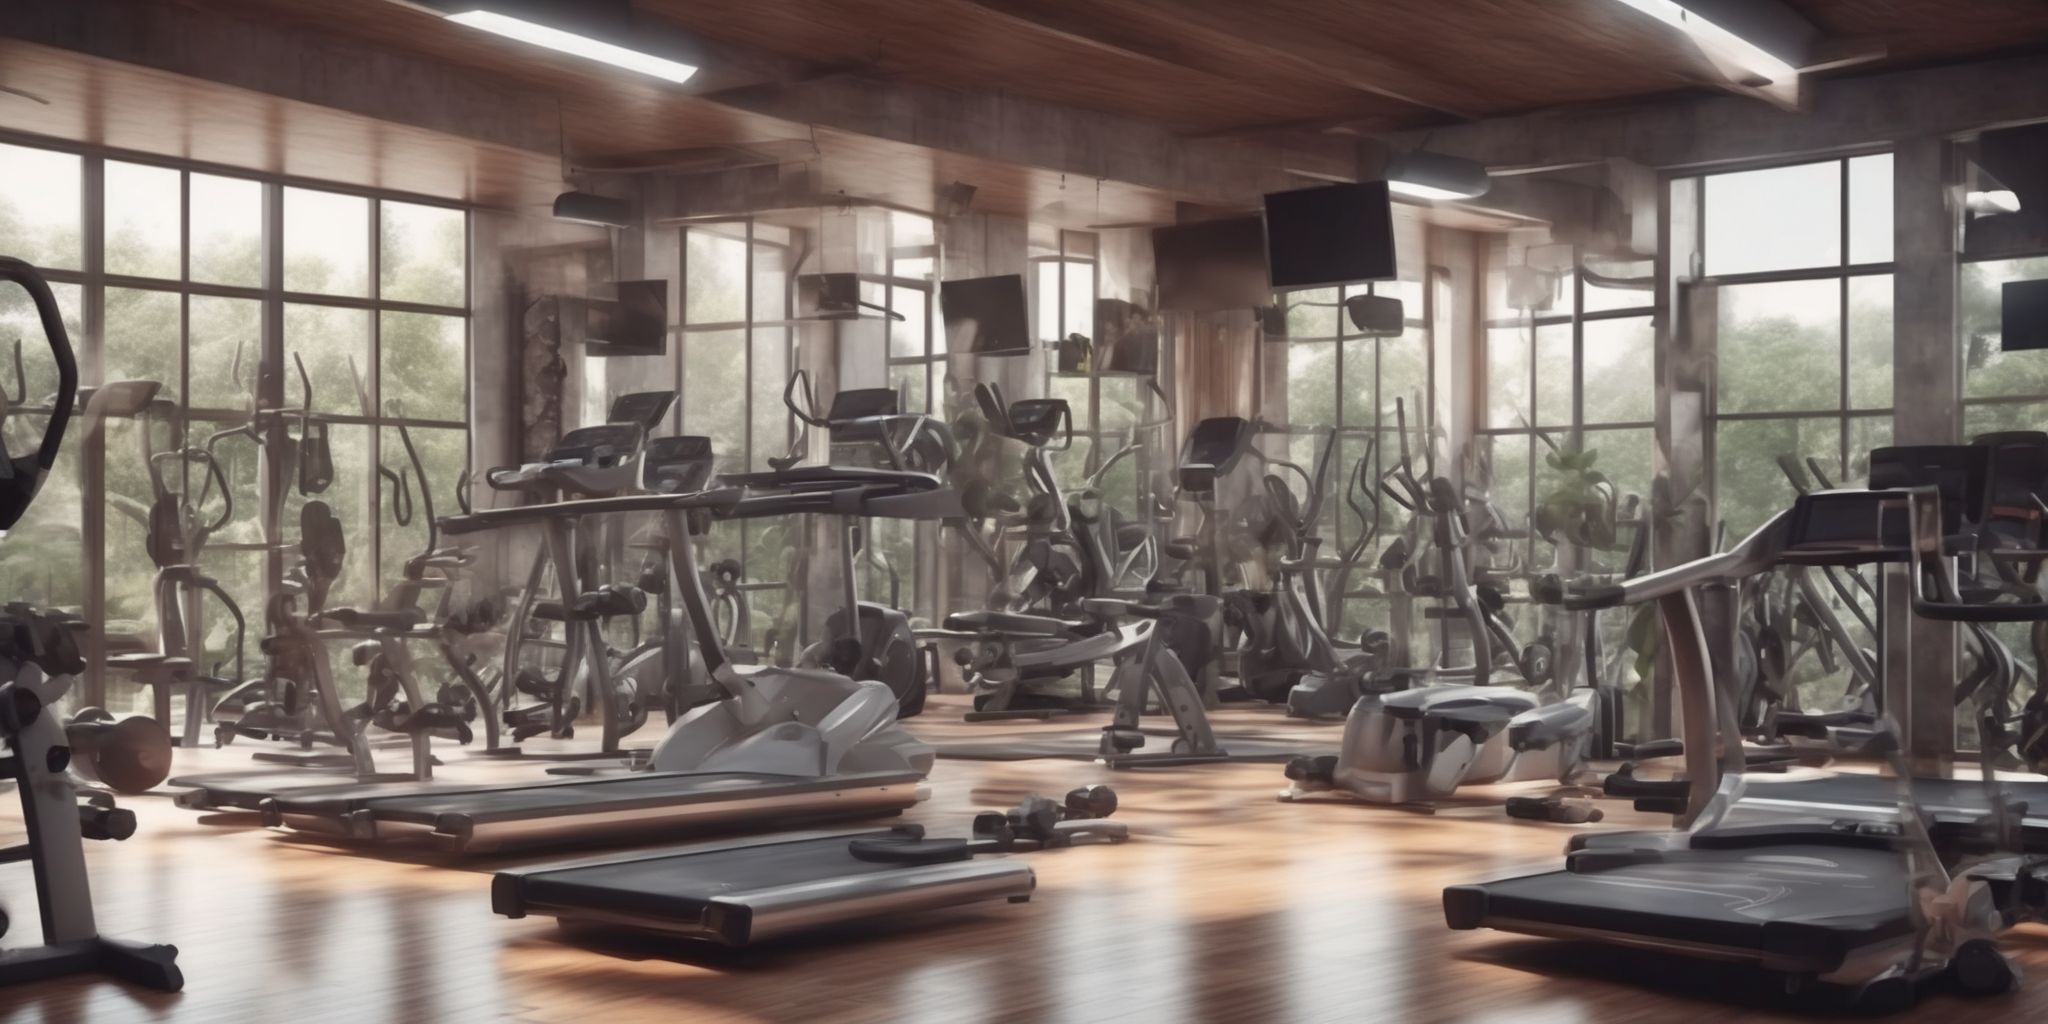 Gym  in realistic, photographic style